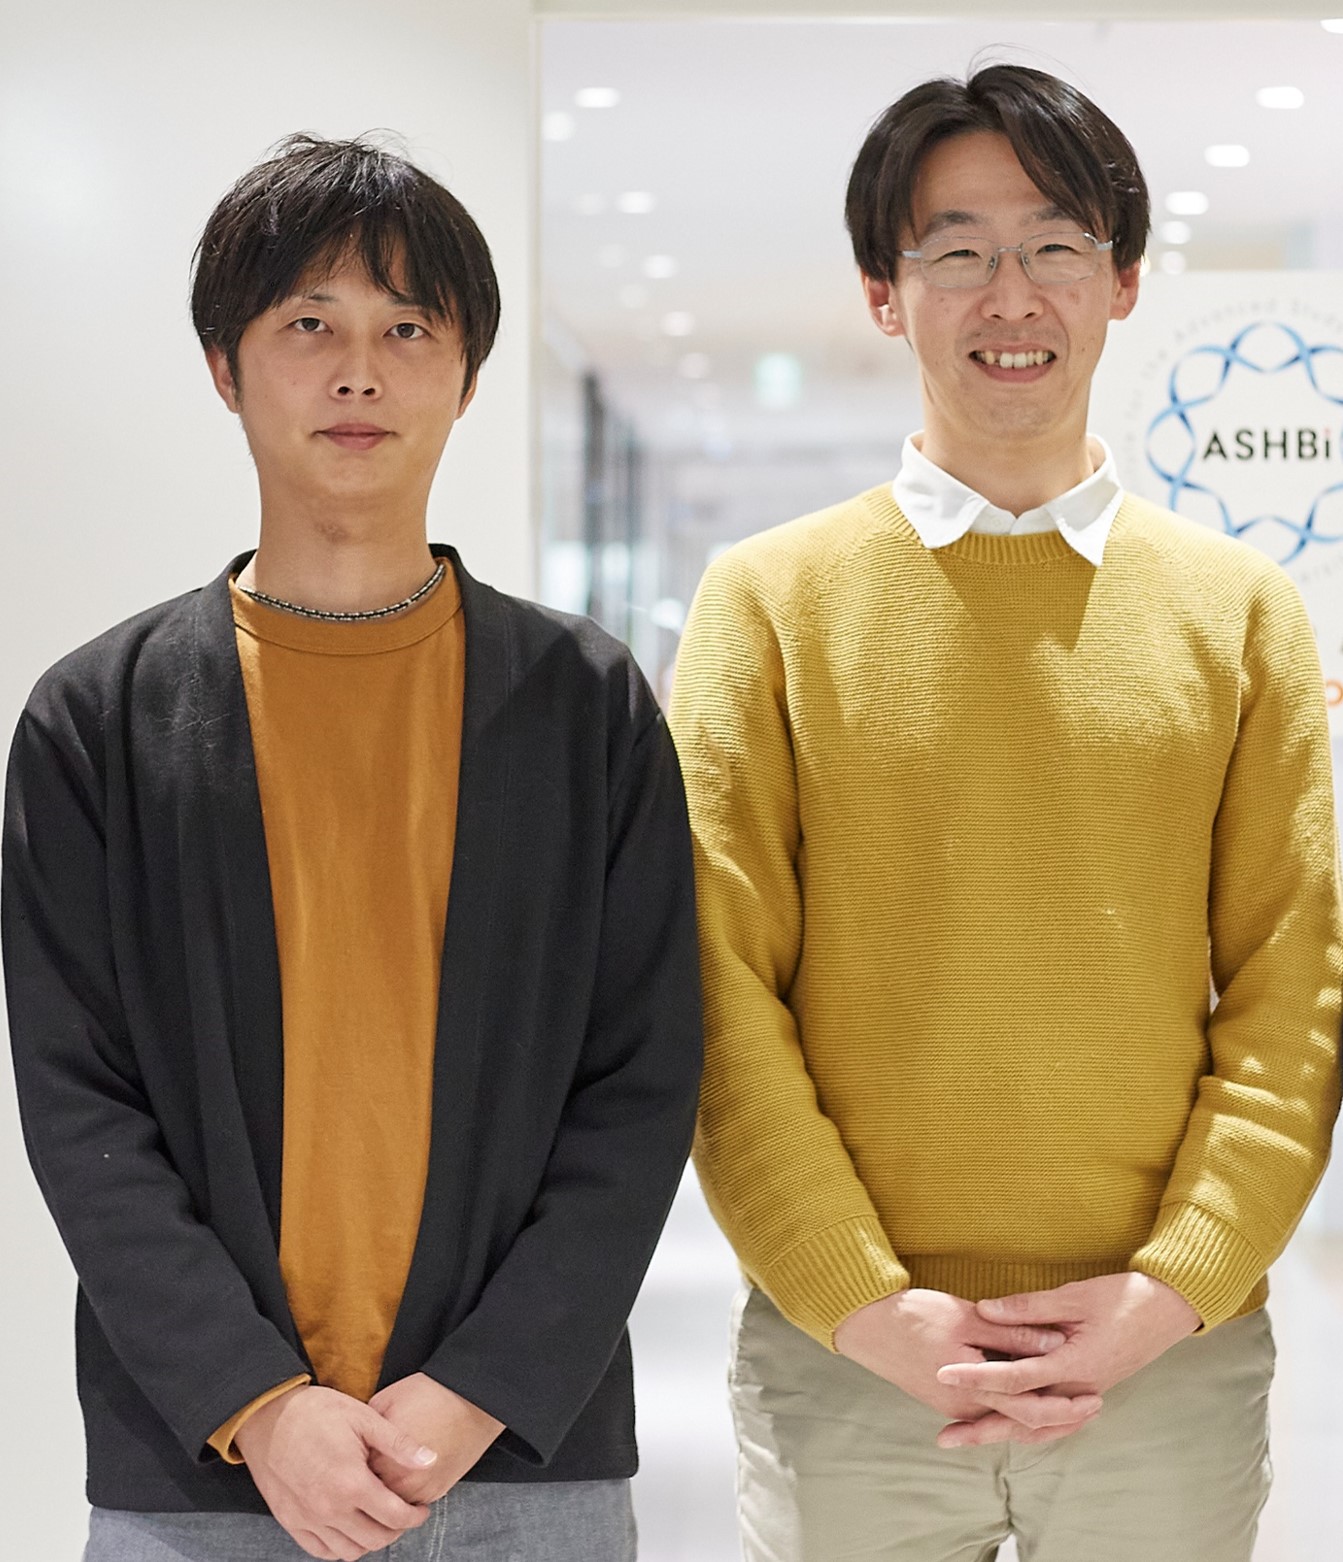 Dr. Imoto and Dr. Nakamura’s interview article has been published in the WPI Forum